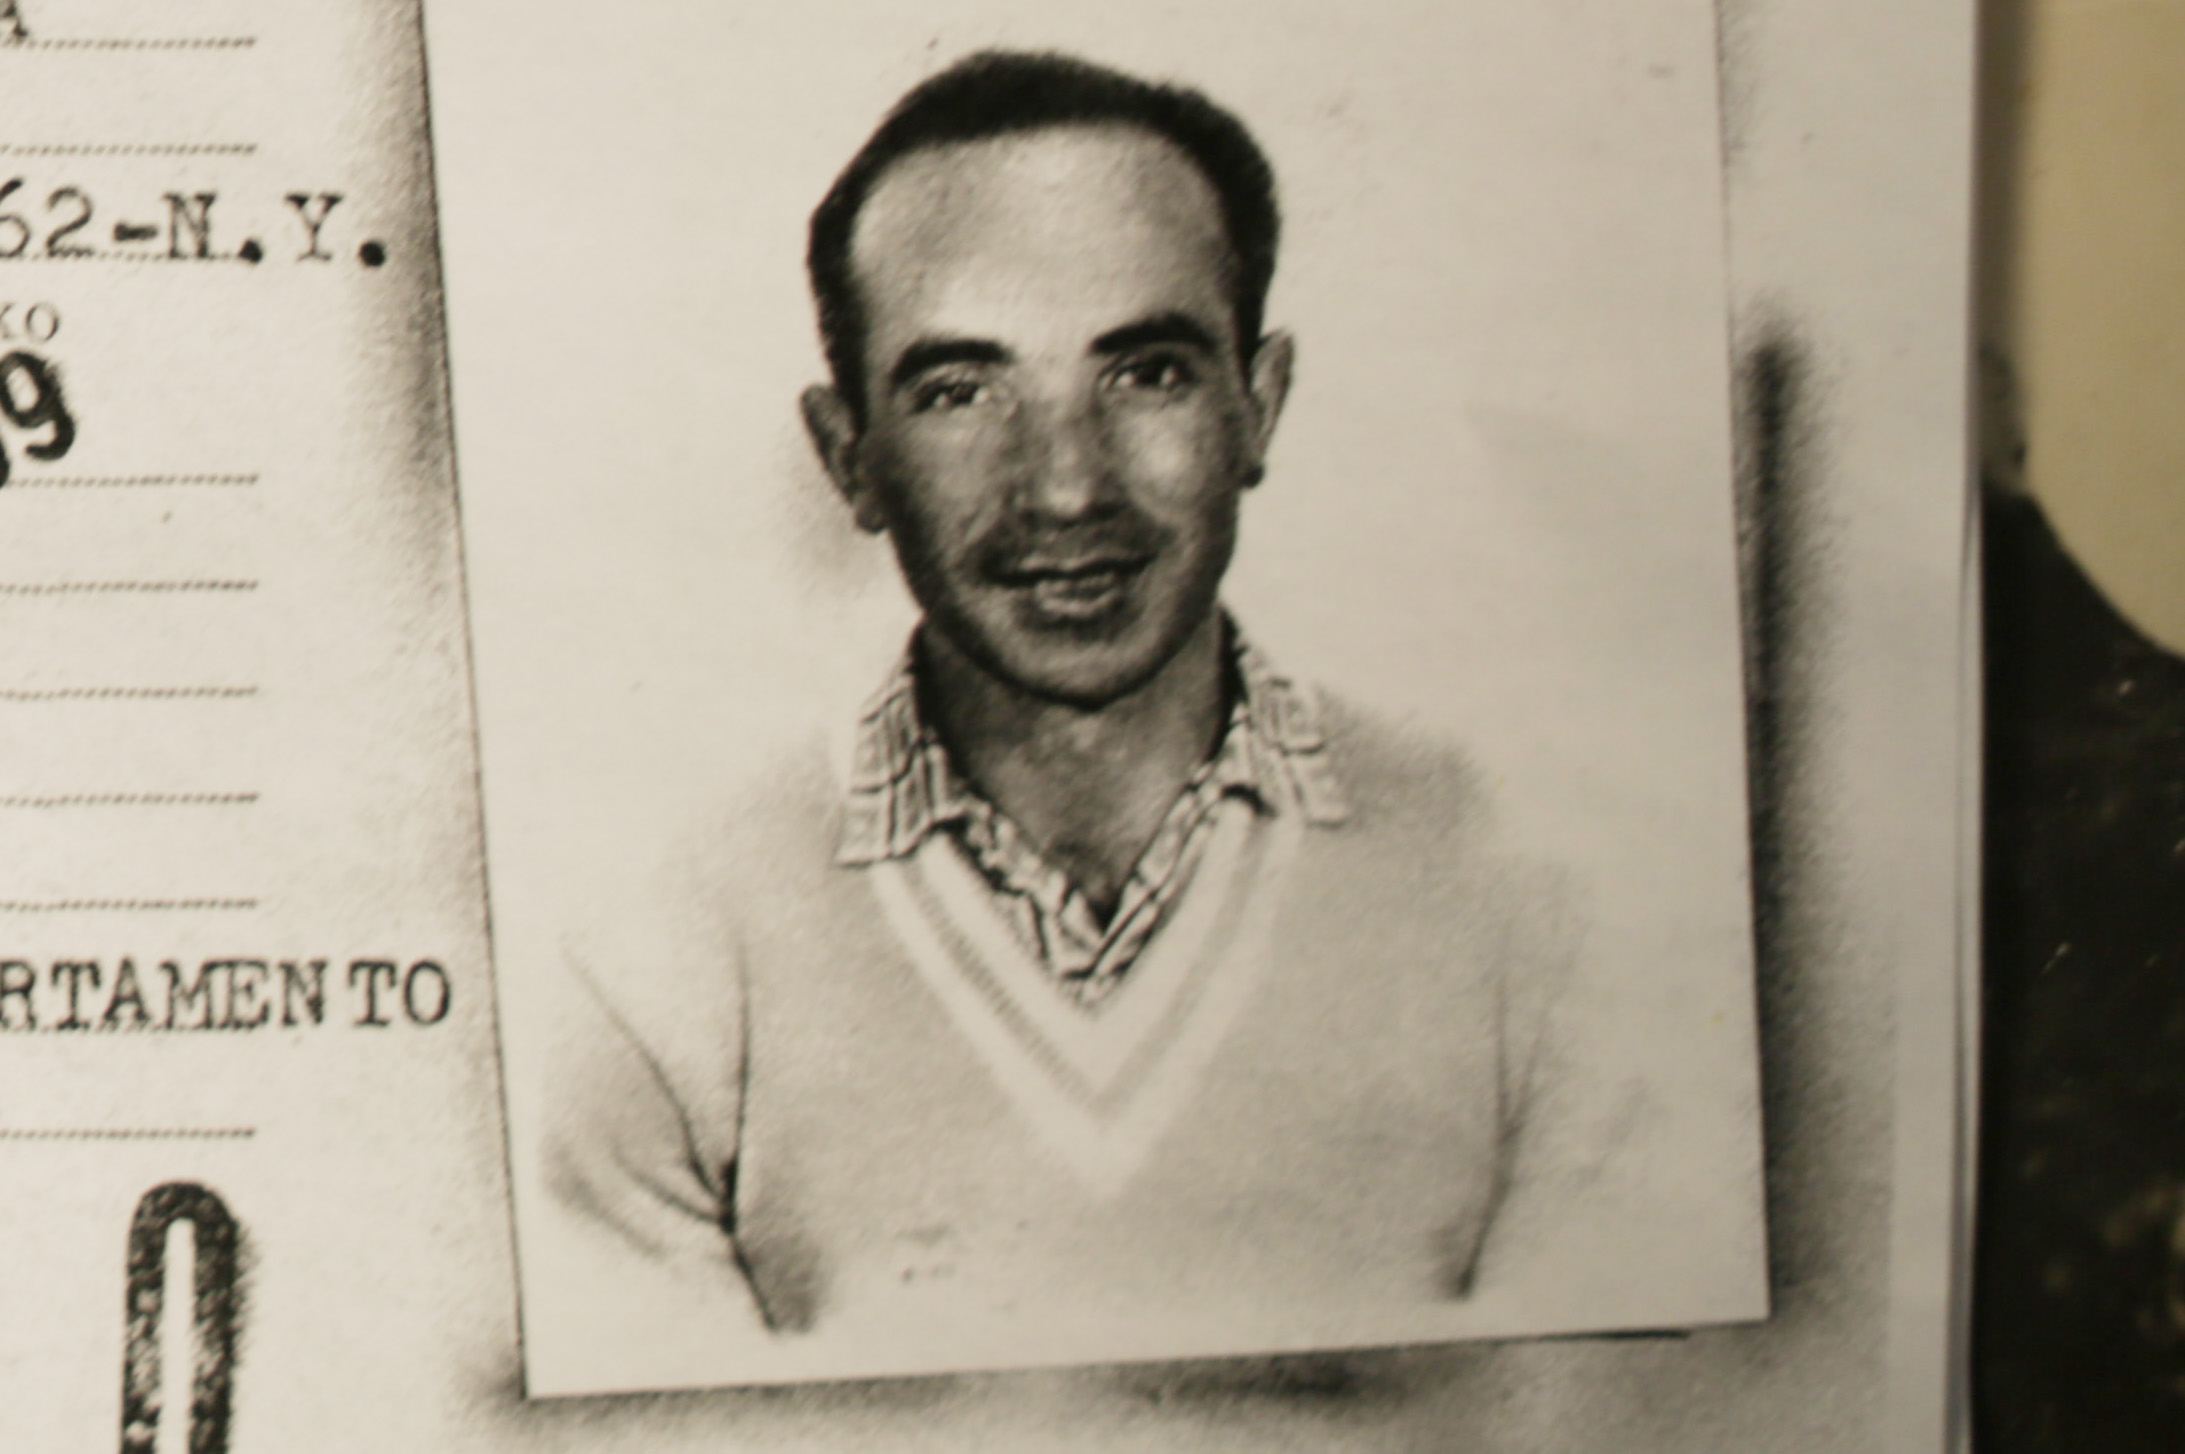 PHOTO: Holocaust survivor Leon Sherman is pictured in a travel document issued in 1959.